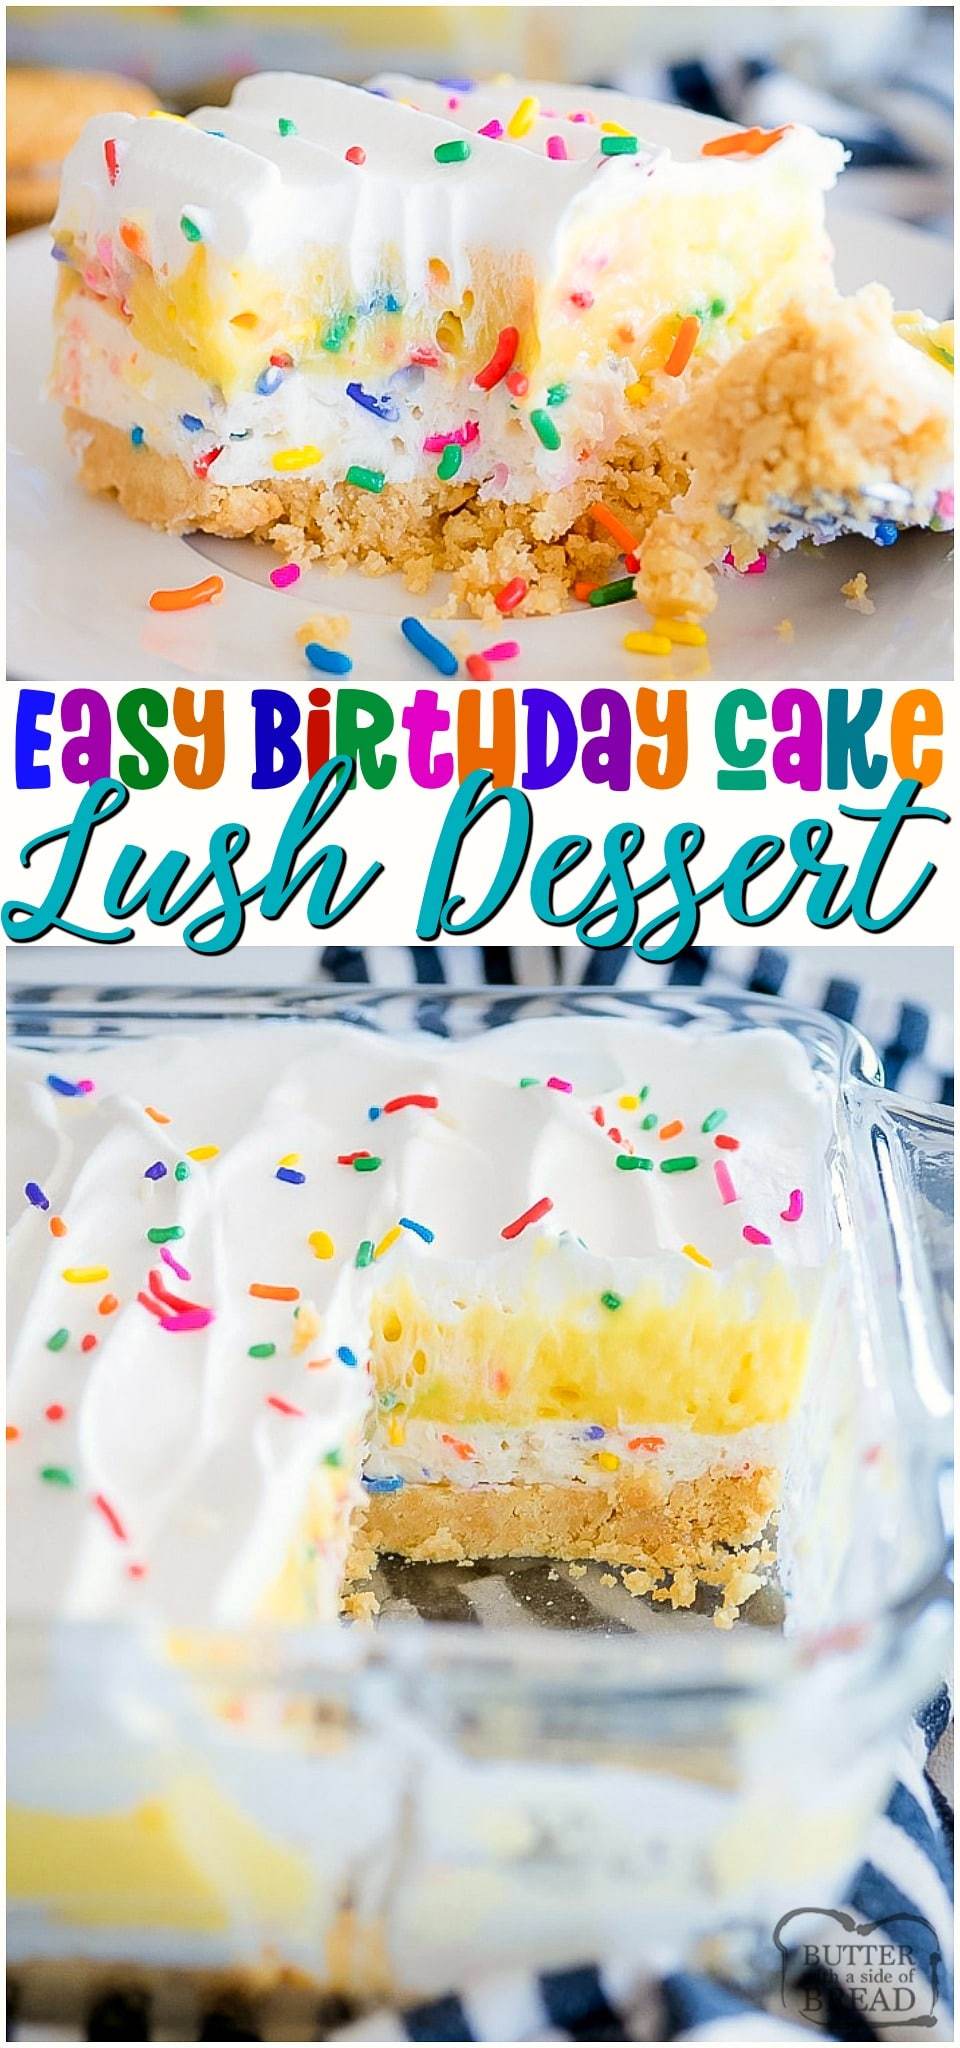 Birthday Cake Lush is a no bake dessert made with crushed Oreos, pudding, sweet cream and cake mix! Full of that cake batter flavor, this sweet, creamy layered dessert is perfect for any celebration! #lush #birthdaycake #layered #dessert #pudding #nobake #recipe from BUTTER WITH A SIDE OF BREAD